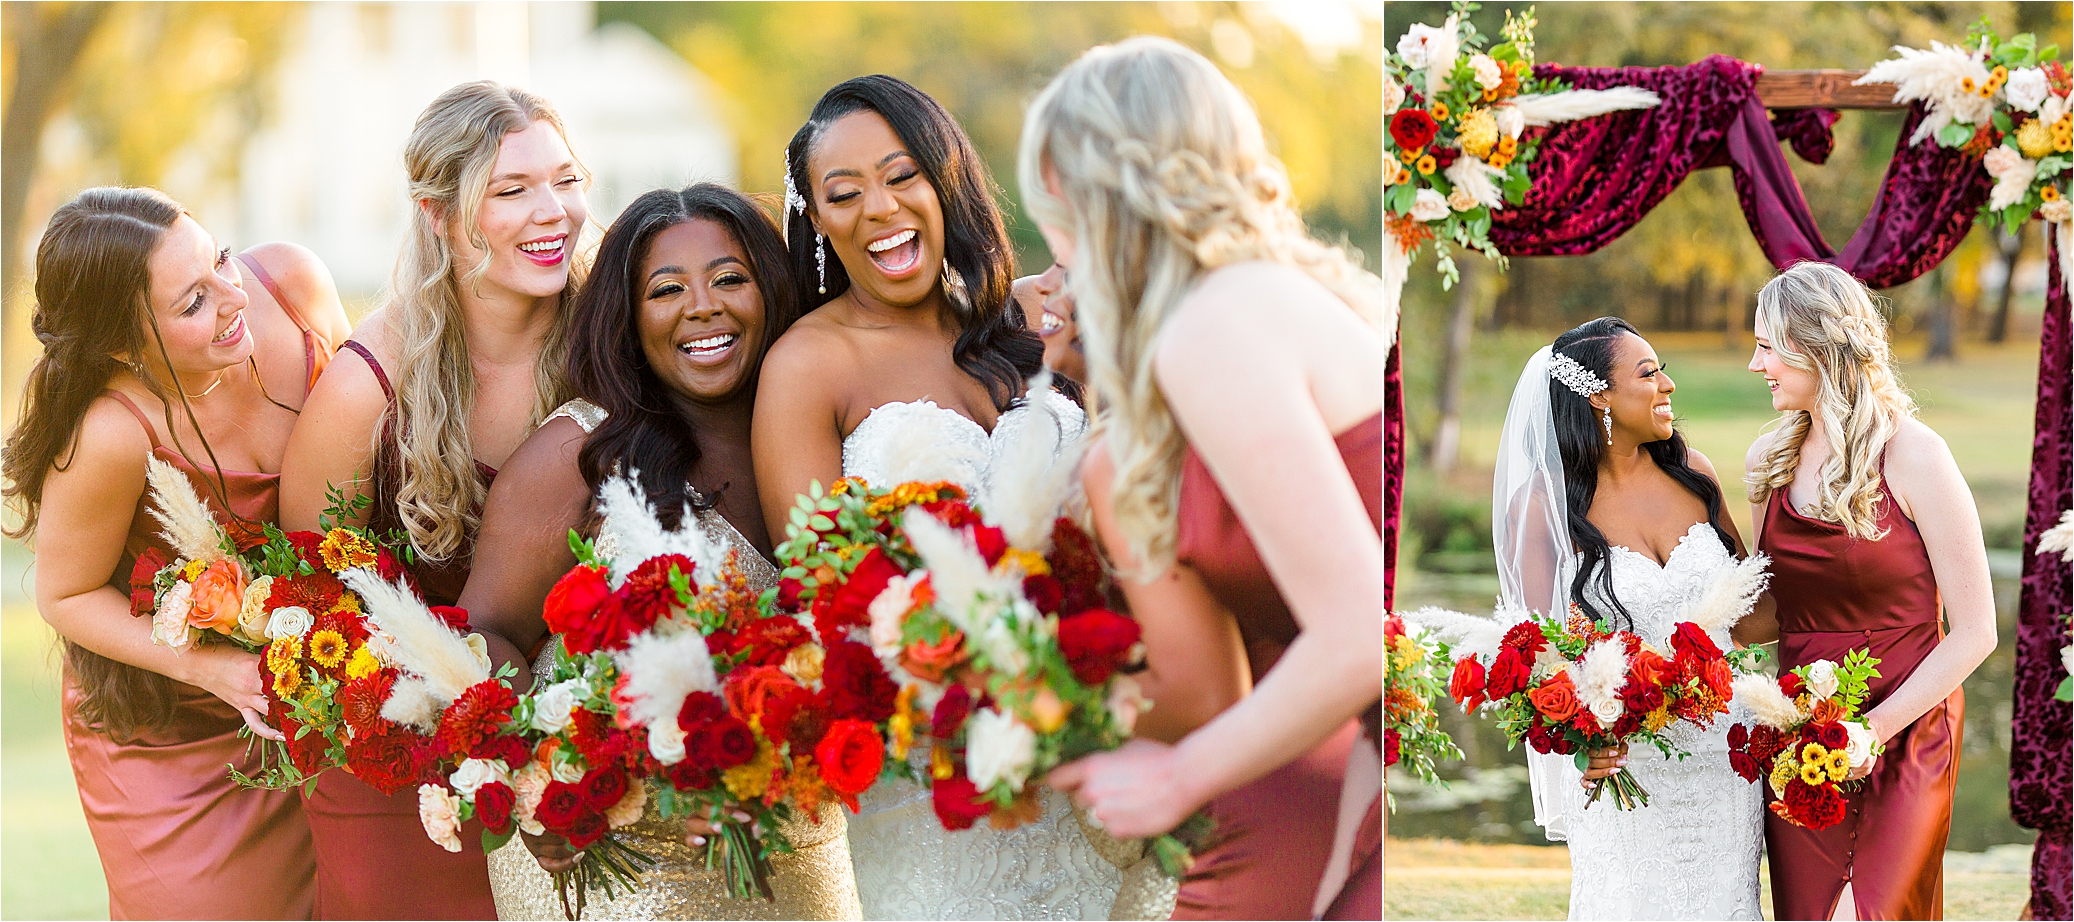 A bride and her bridesmaids smile during bridal party portraits at The Milestone by San Antonio Wedding Photographer Jillian Hogan 